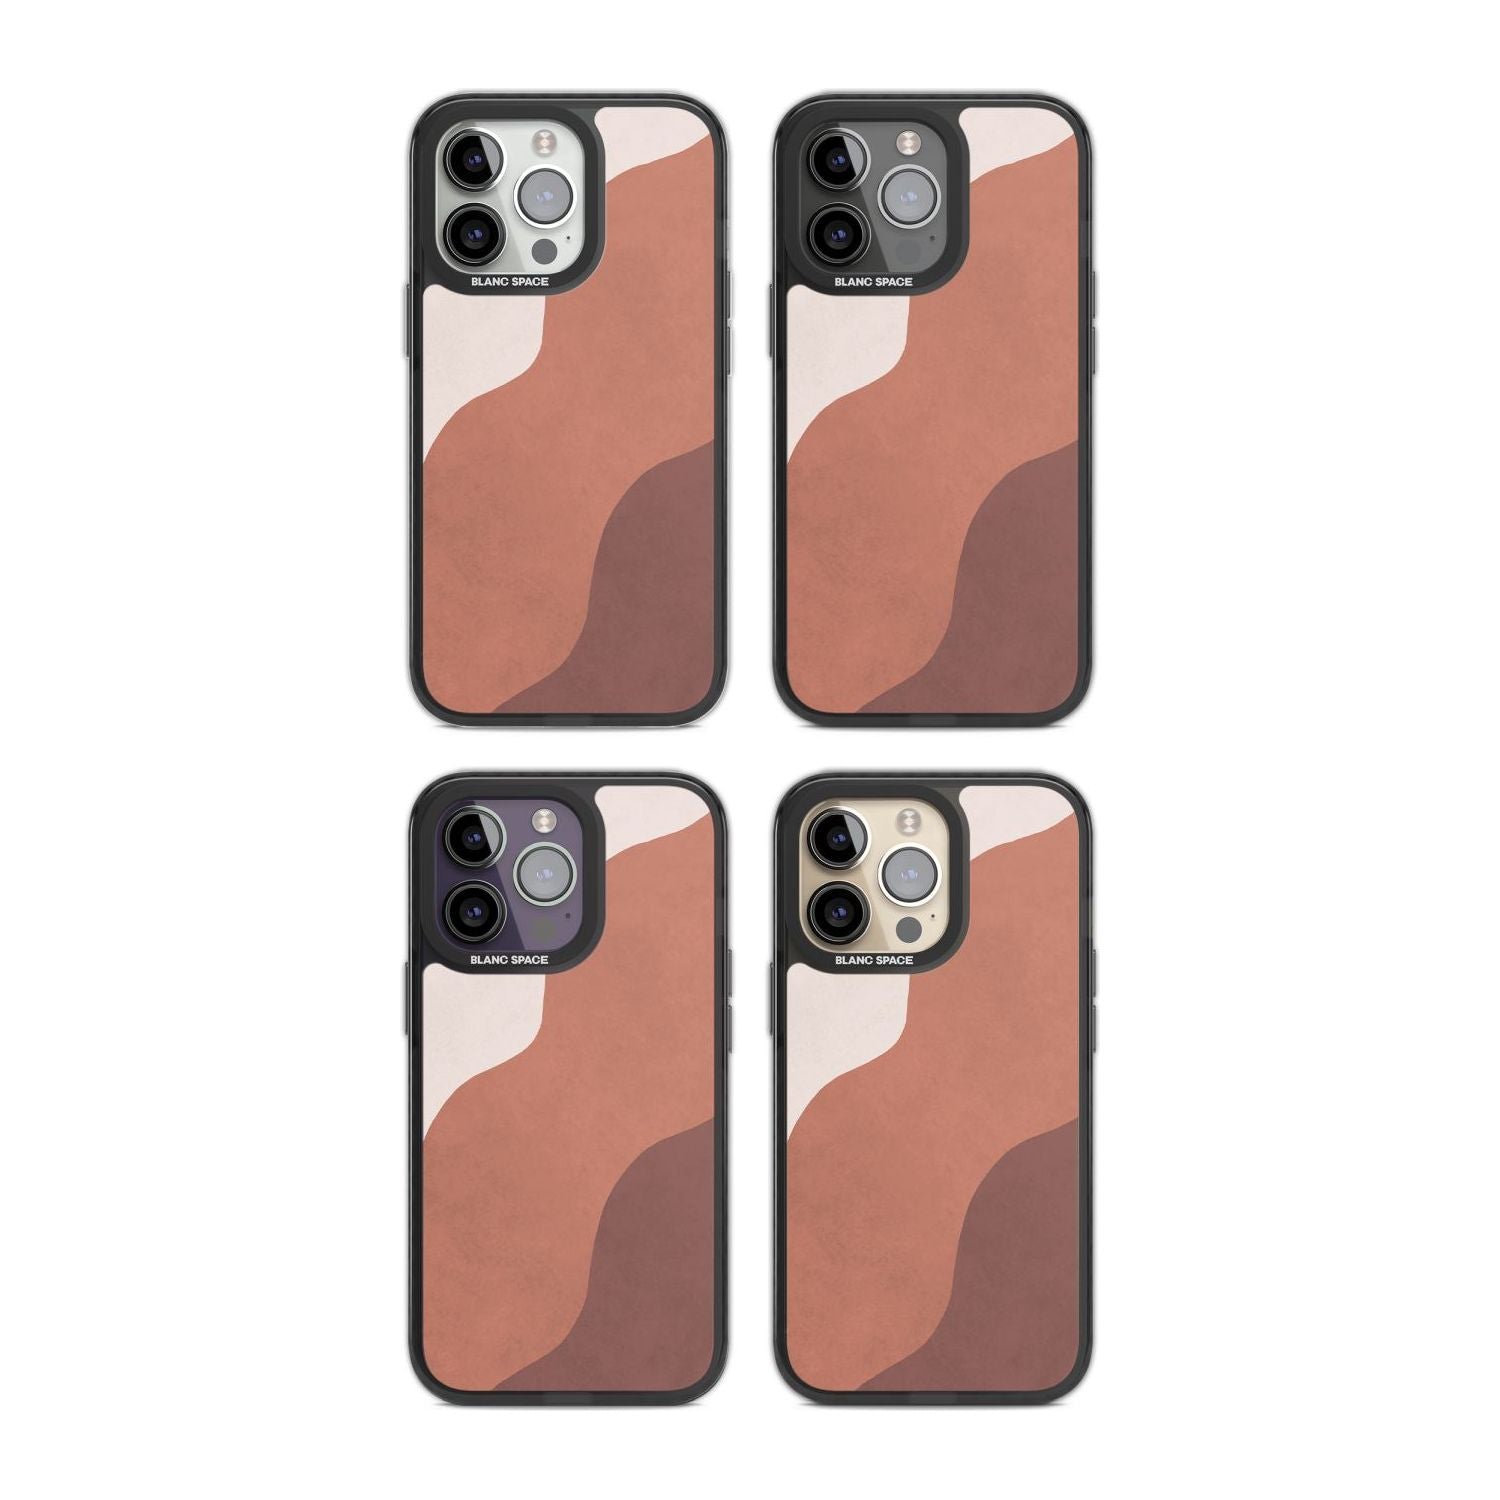 Lush Abstract Watercolour Design #3 Phone Case iPhone 15 Pro Max / Black Impact Case,iPhone 15 Plus / Black Impact Case,iPhone 15 Pro / Black Impact Case,iPhone 15 / Black Impact Case,iPhone 15 Pro Max / Impact Case,iPhone 15 Plus / Impact Case,iPhone 15 Pro / Impact Case,iPhone 15 / Impact Case,iPhone 15 Pro Max / Magsafe Black Impact Case,iPhone 15 Plus / Magsafe Black Impact Case,iPhone 15 Pro / Magsafe Black Impact Case,iPhone 15 / Magsafe Black Impact Case,iPhone 14 Pro Max / Black Impact Case,iPhone 1